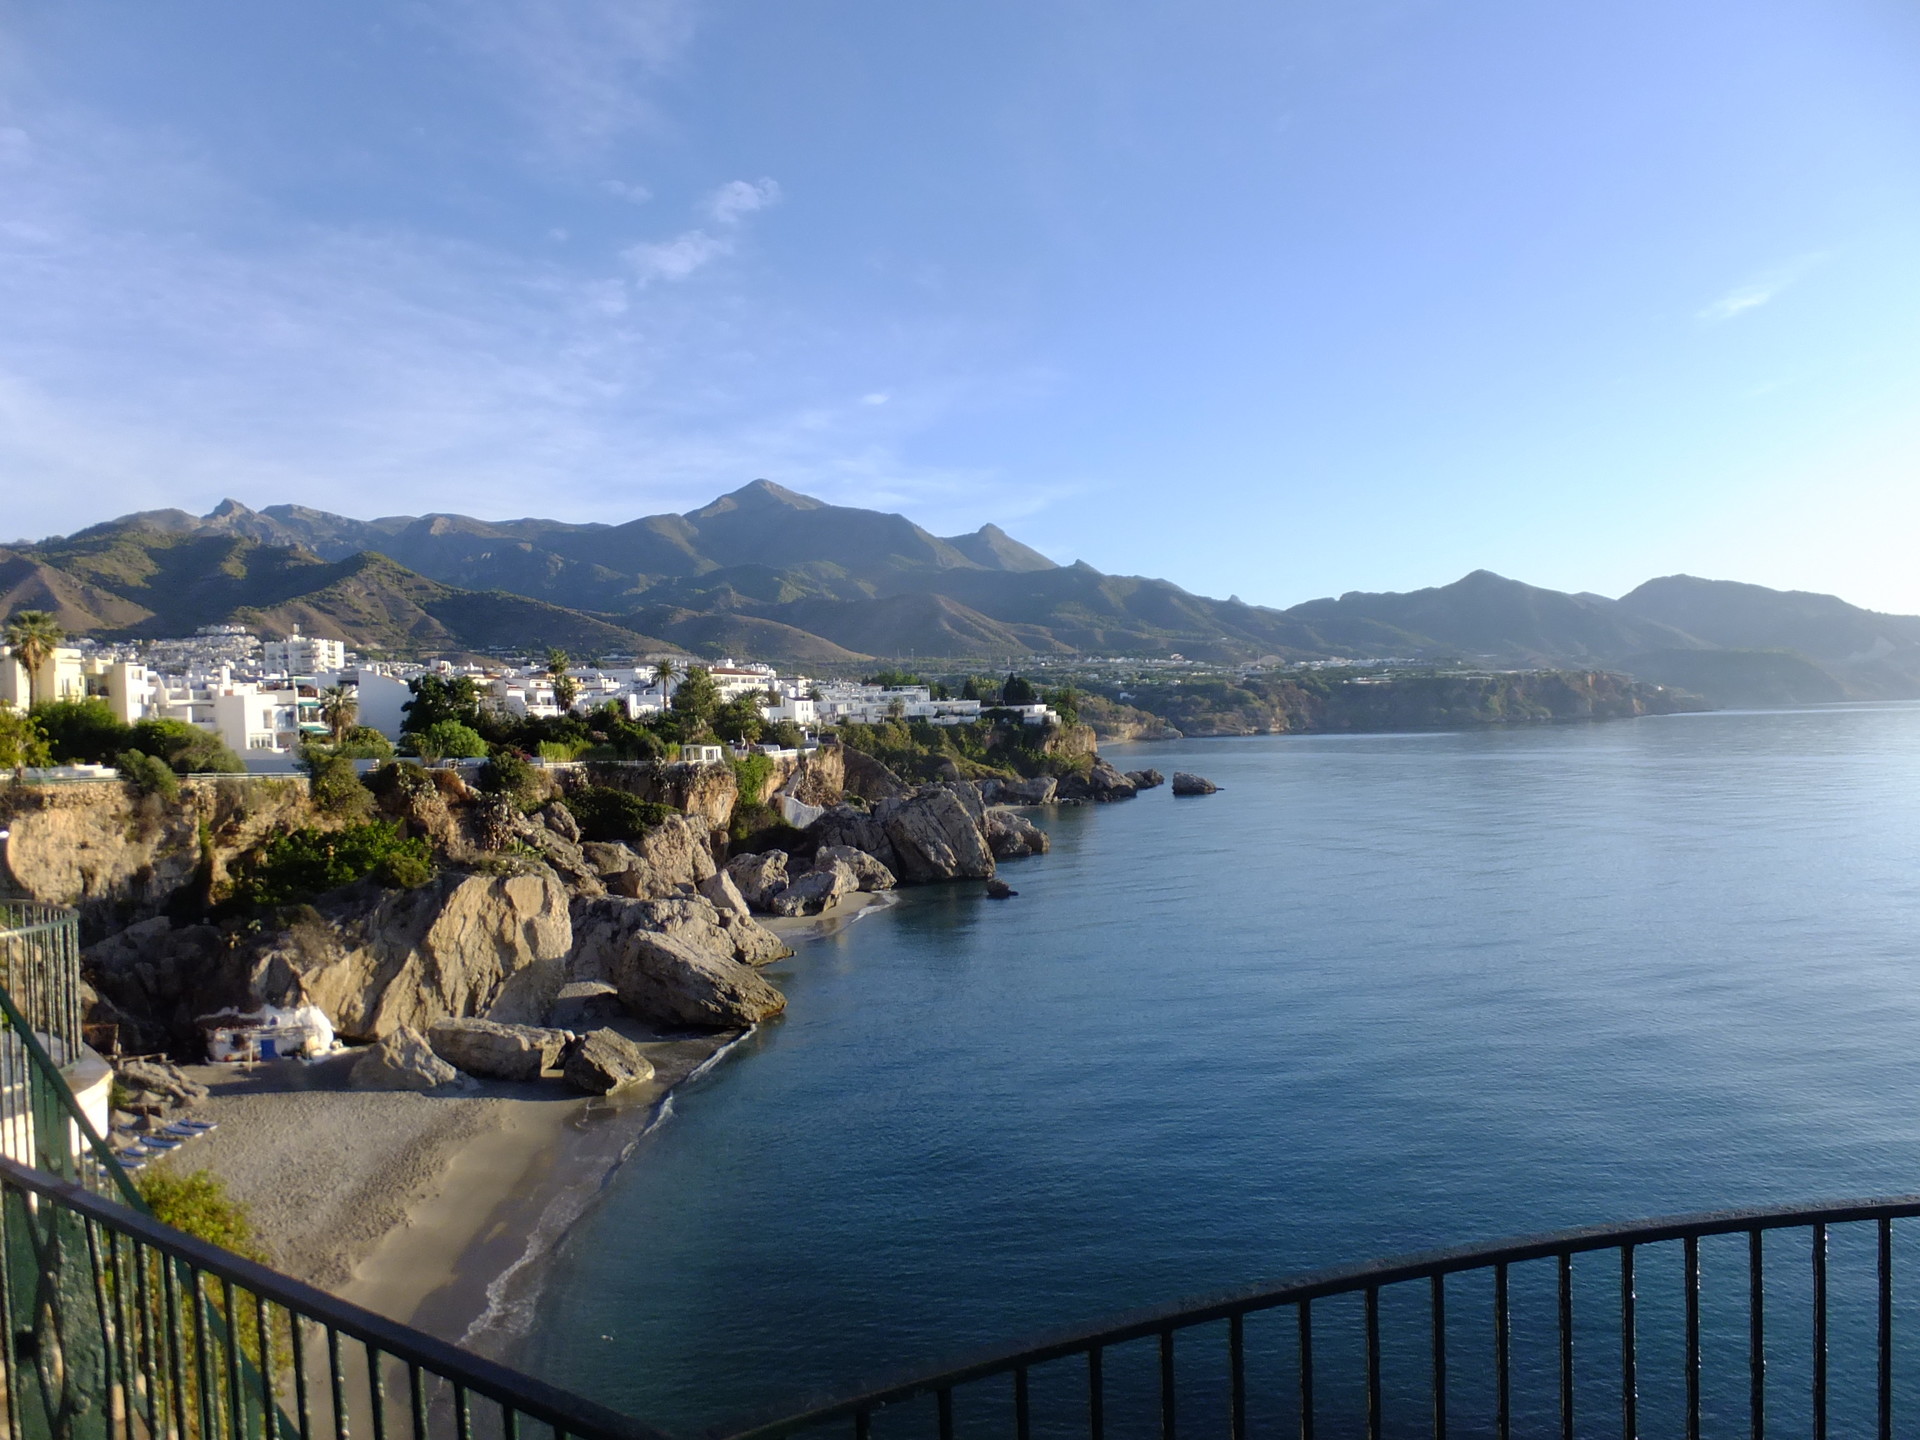 Nerja - a small city located near Malaga that has so much to offer